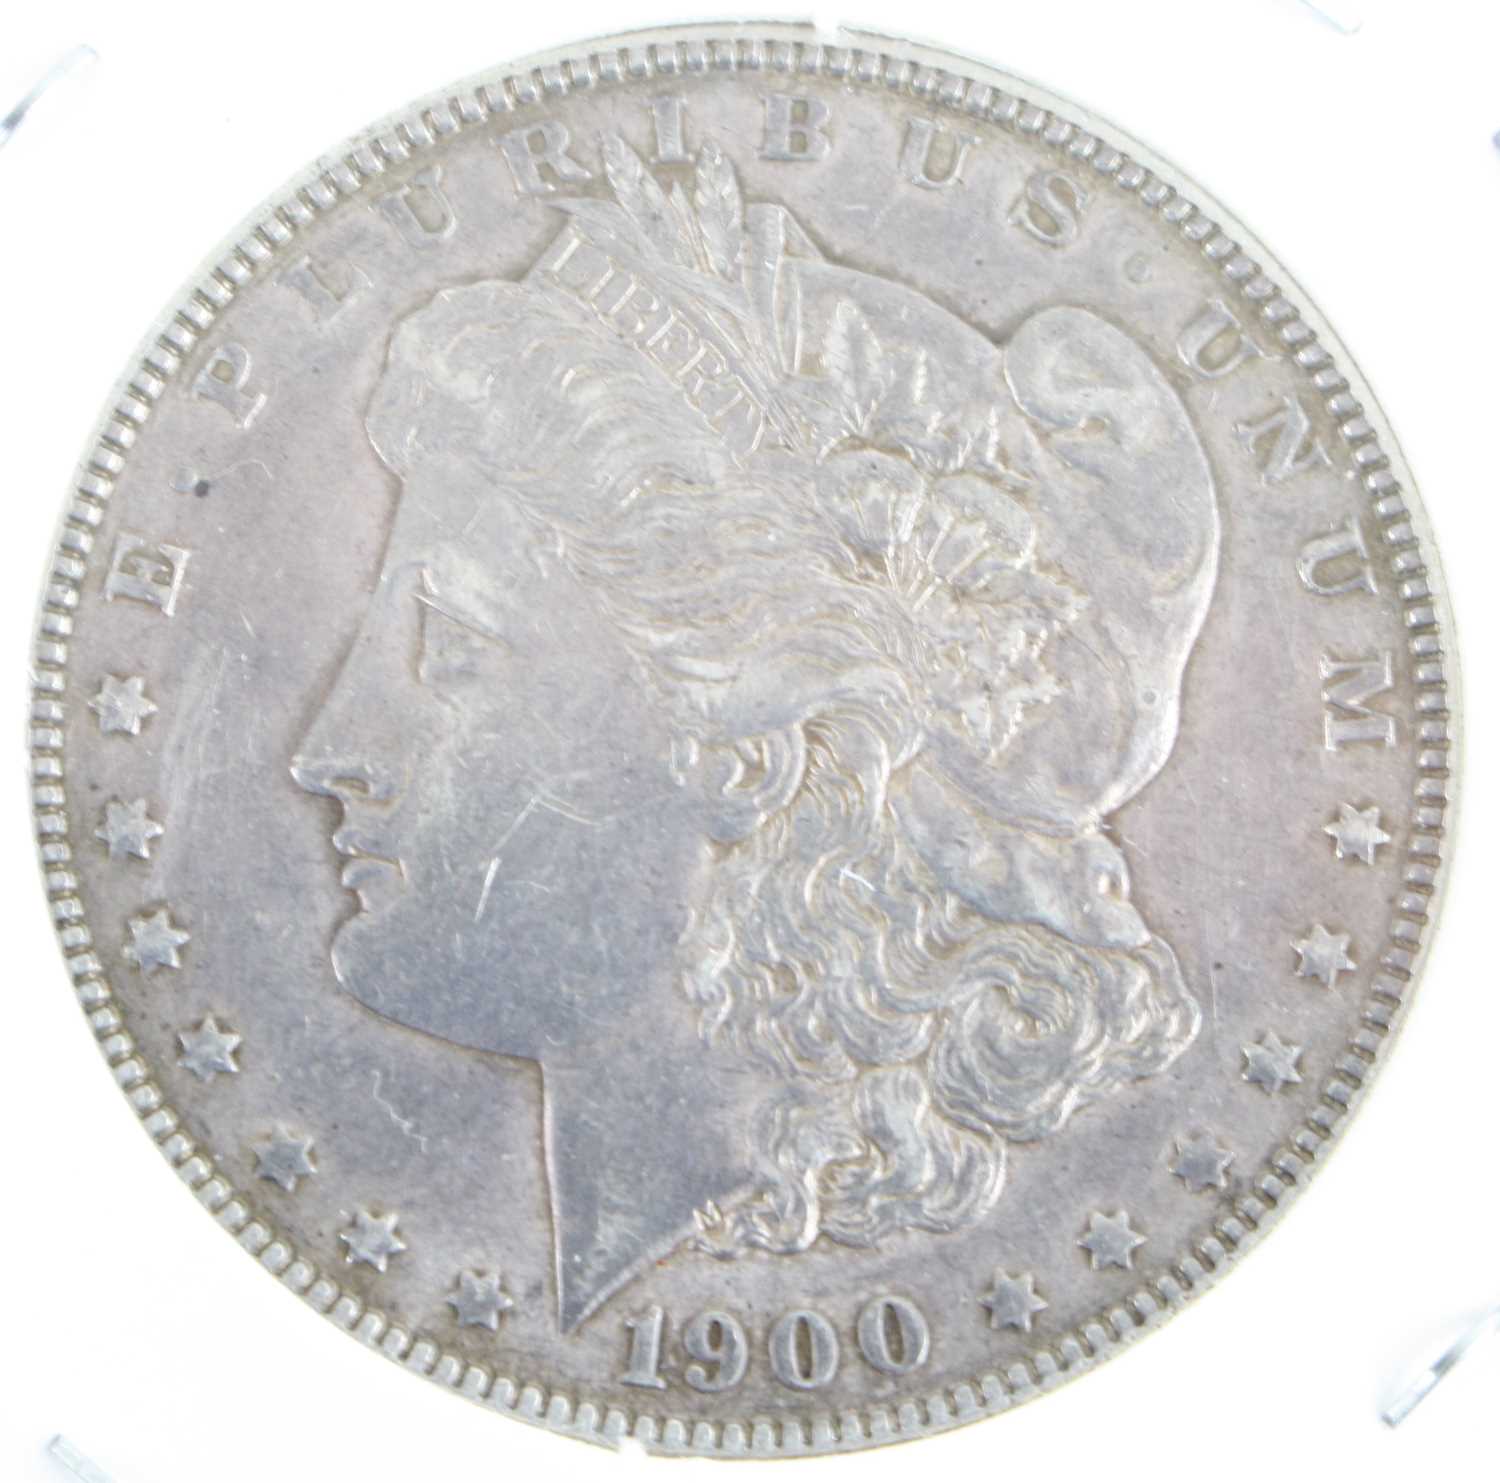 United States of America, 1881 Morgan dollar, obv: Liberty bust left above date, rev: eagle